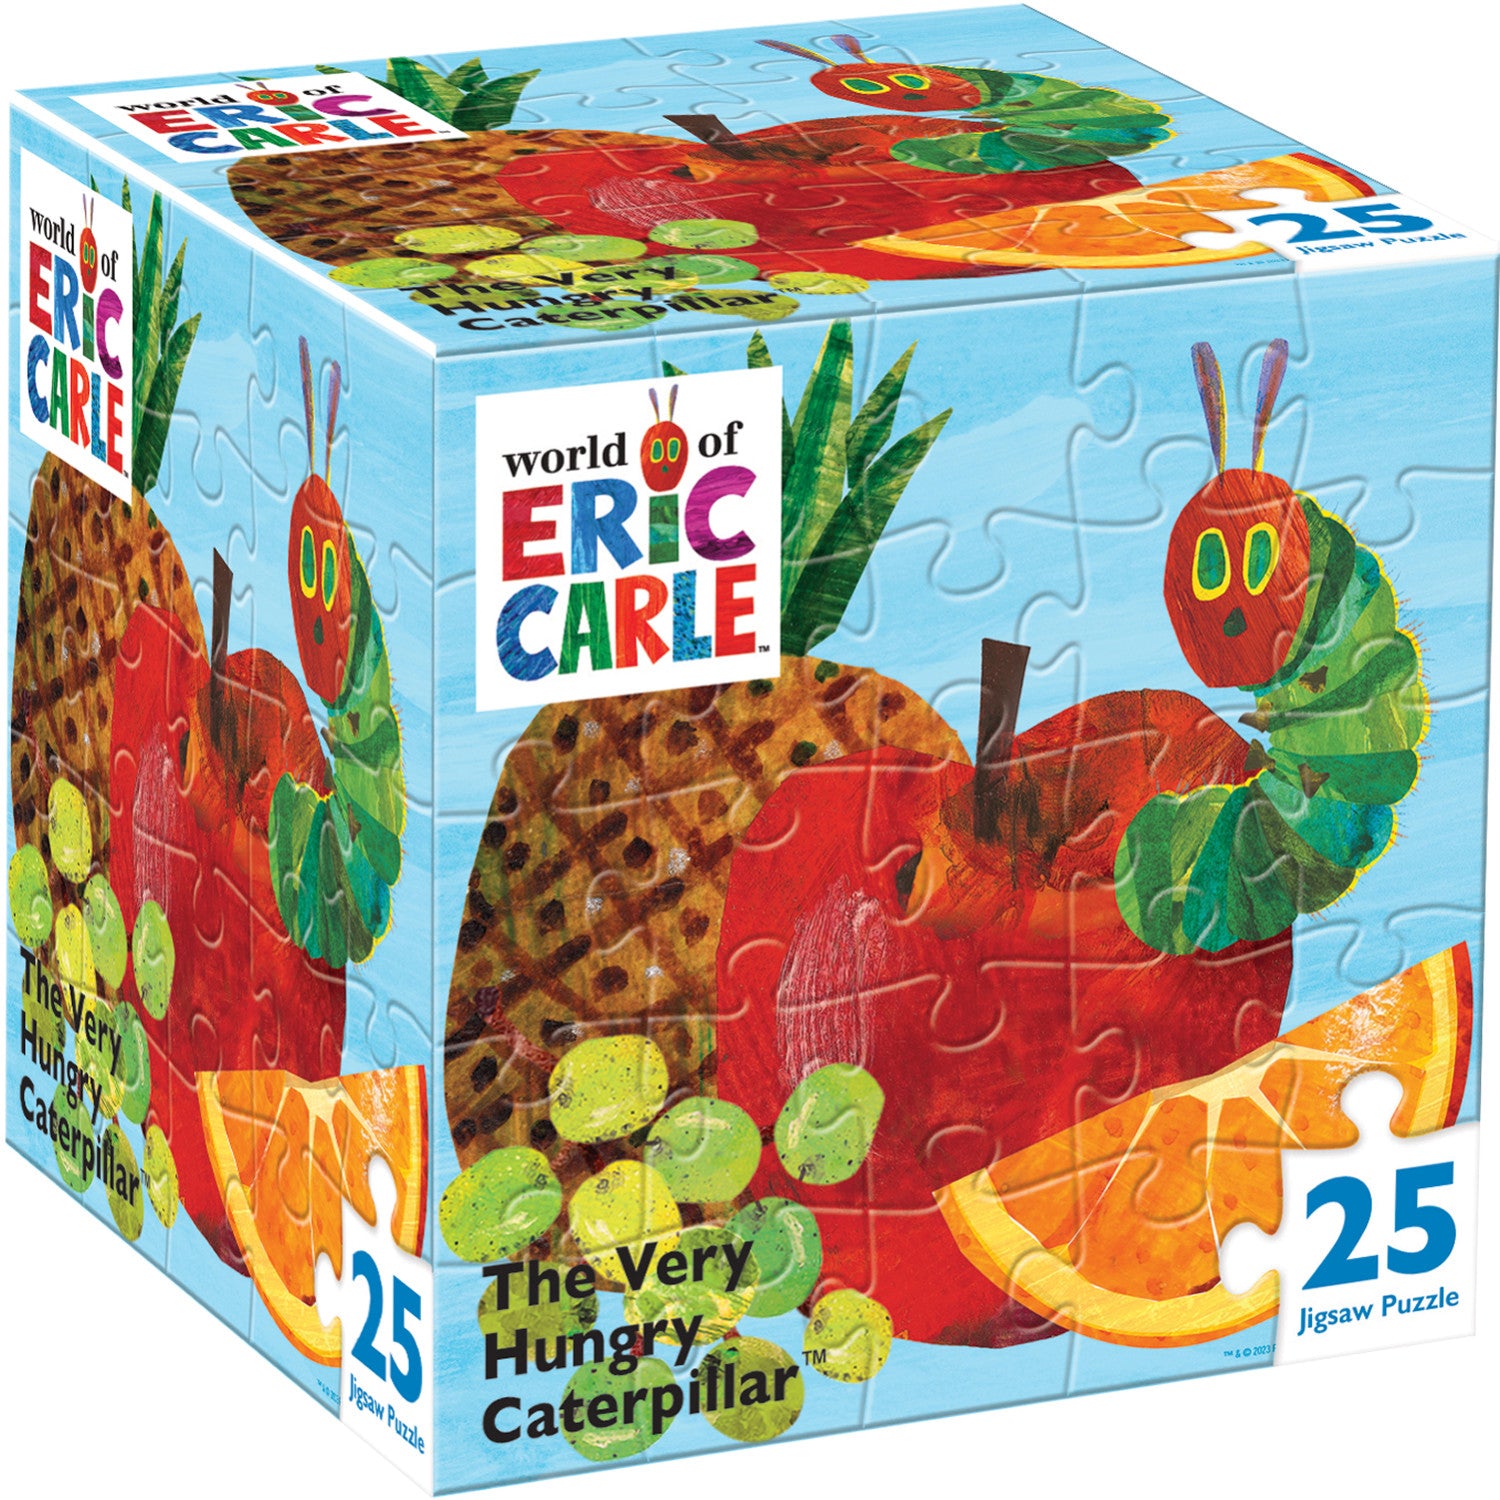 World of Eric Carle - Hungry Caterpillar 25 Piece Puzzle